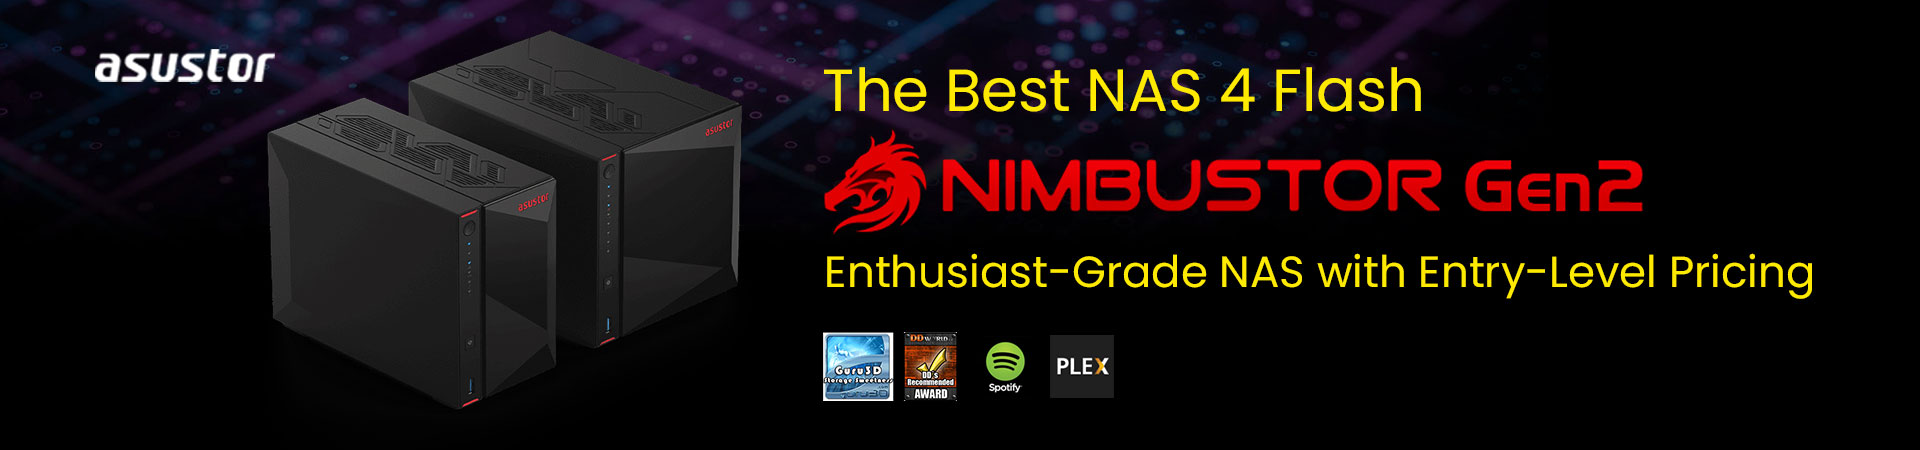 Asustor - The Best NAS 4 Flash - Nimbustor Gen2 - Enthusiast-Grade NAS with Entry-Level Pricing